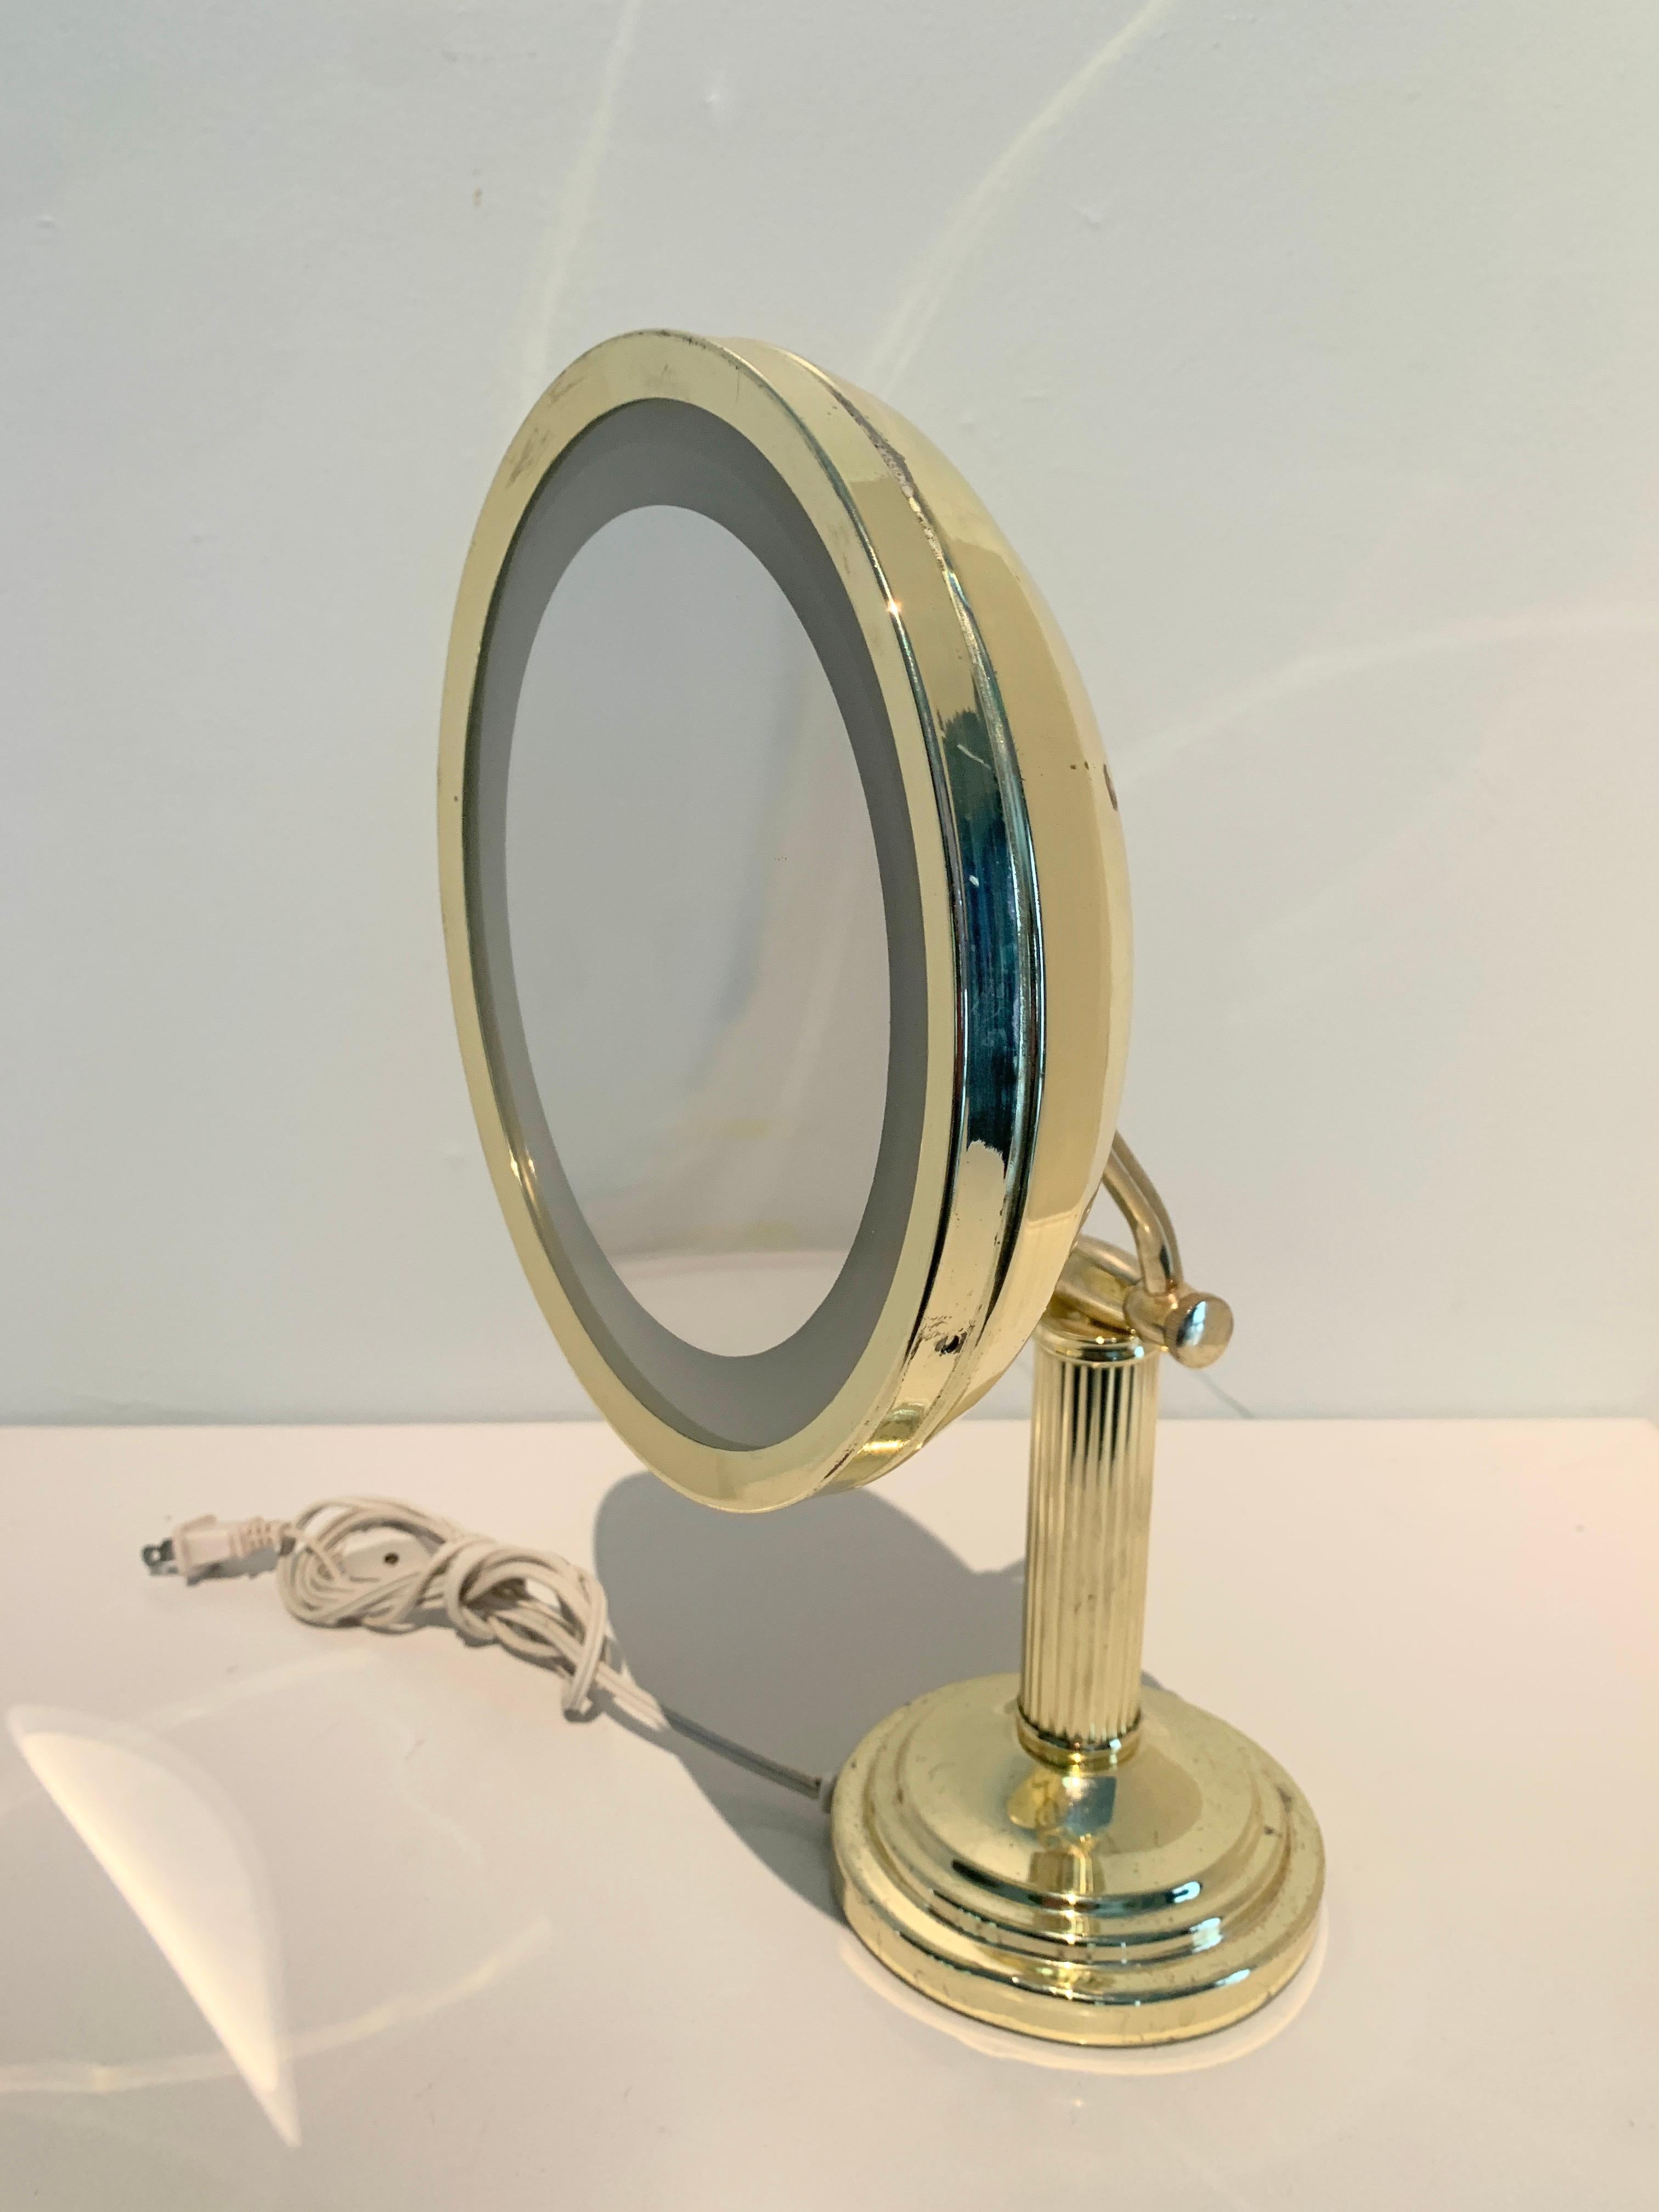 Vanity or Table mirror with lit magnifying mirror - the brass housing and design, allowing the mirror to be adjusted, and tilted are not only a compliment to any dressing room or vanity, but the vintage style makes it a fantastic decorative